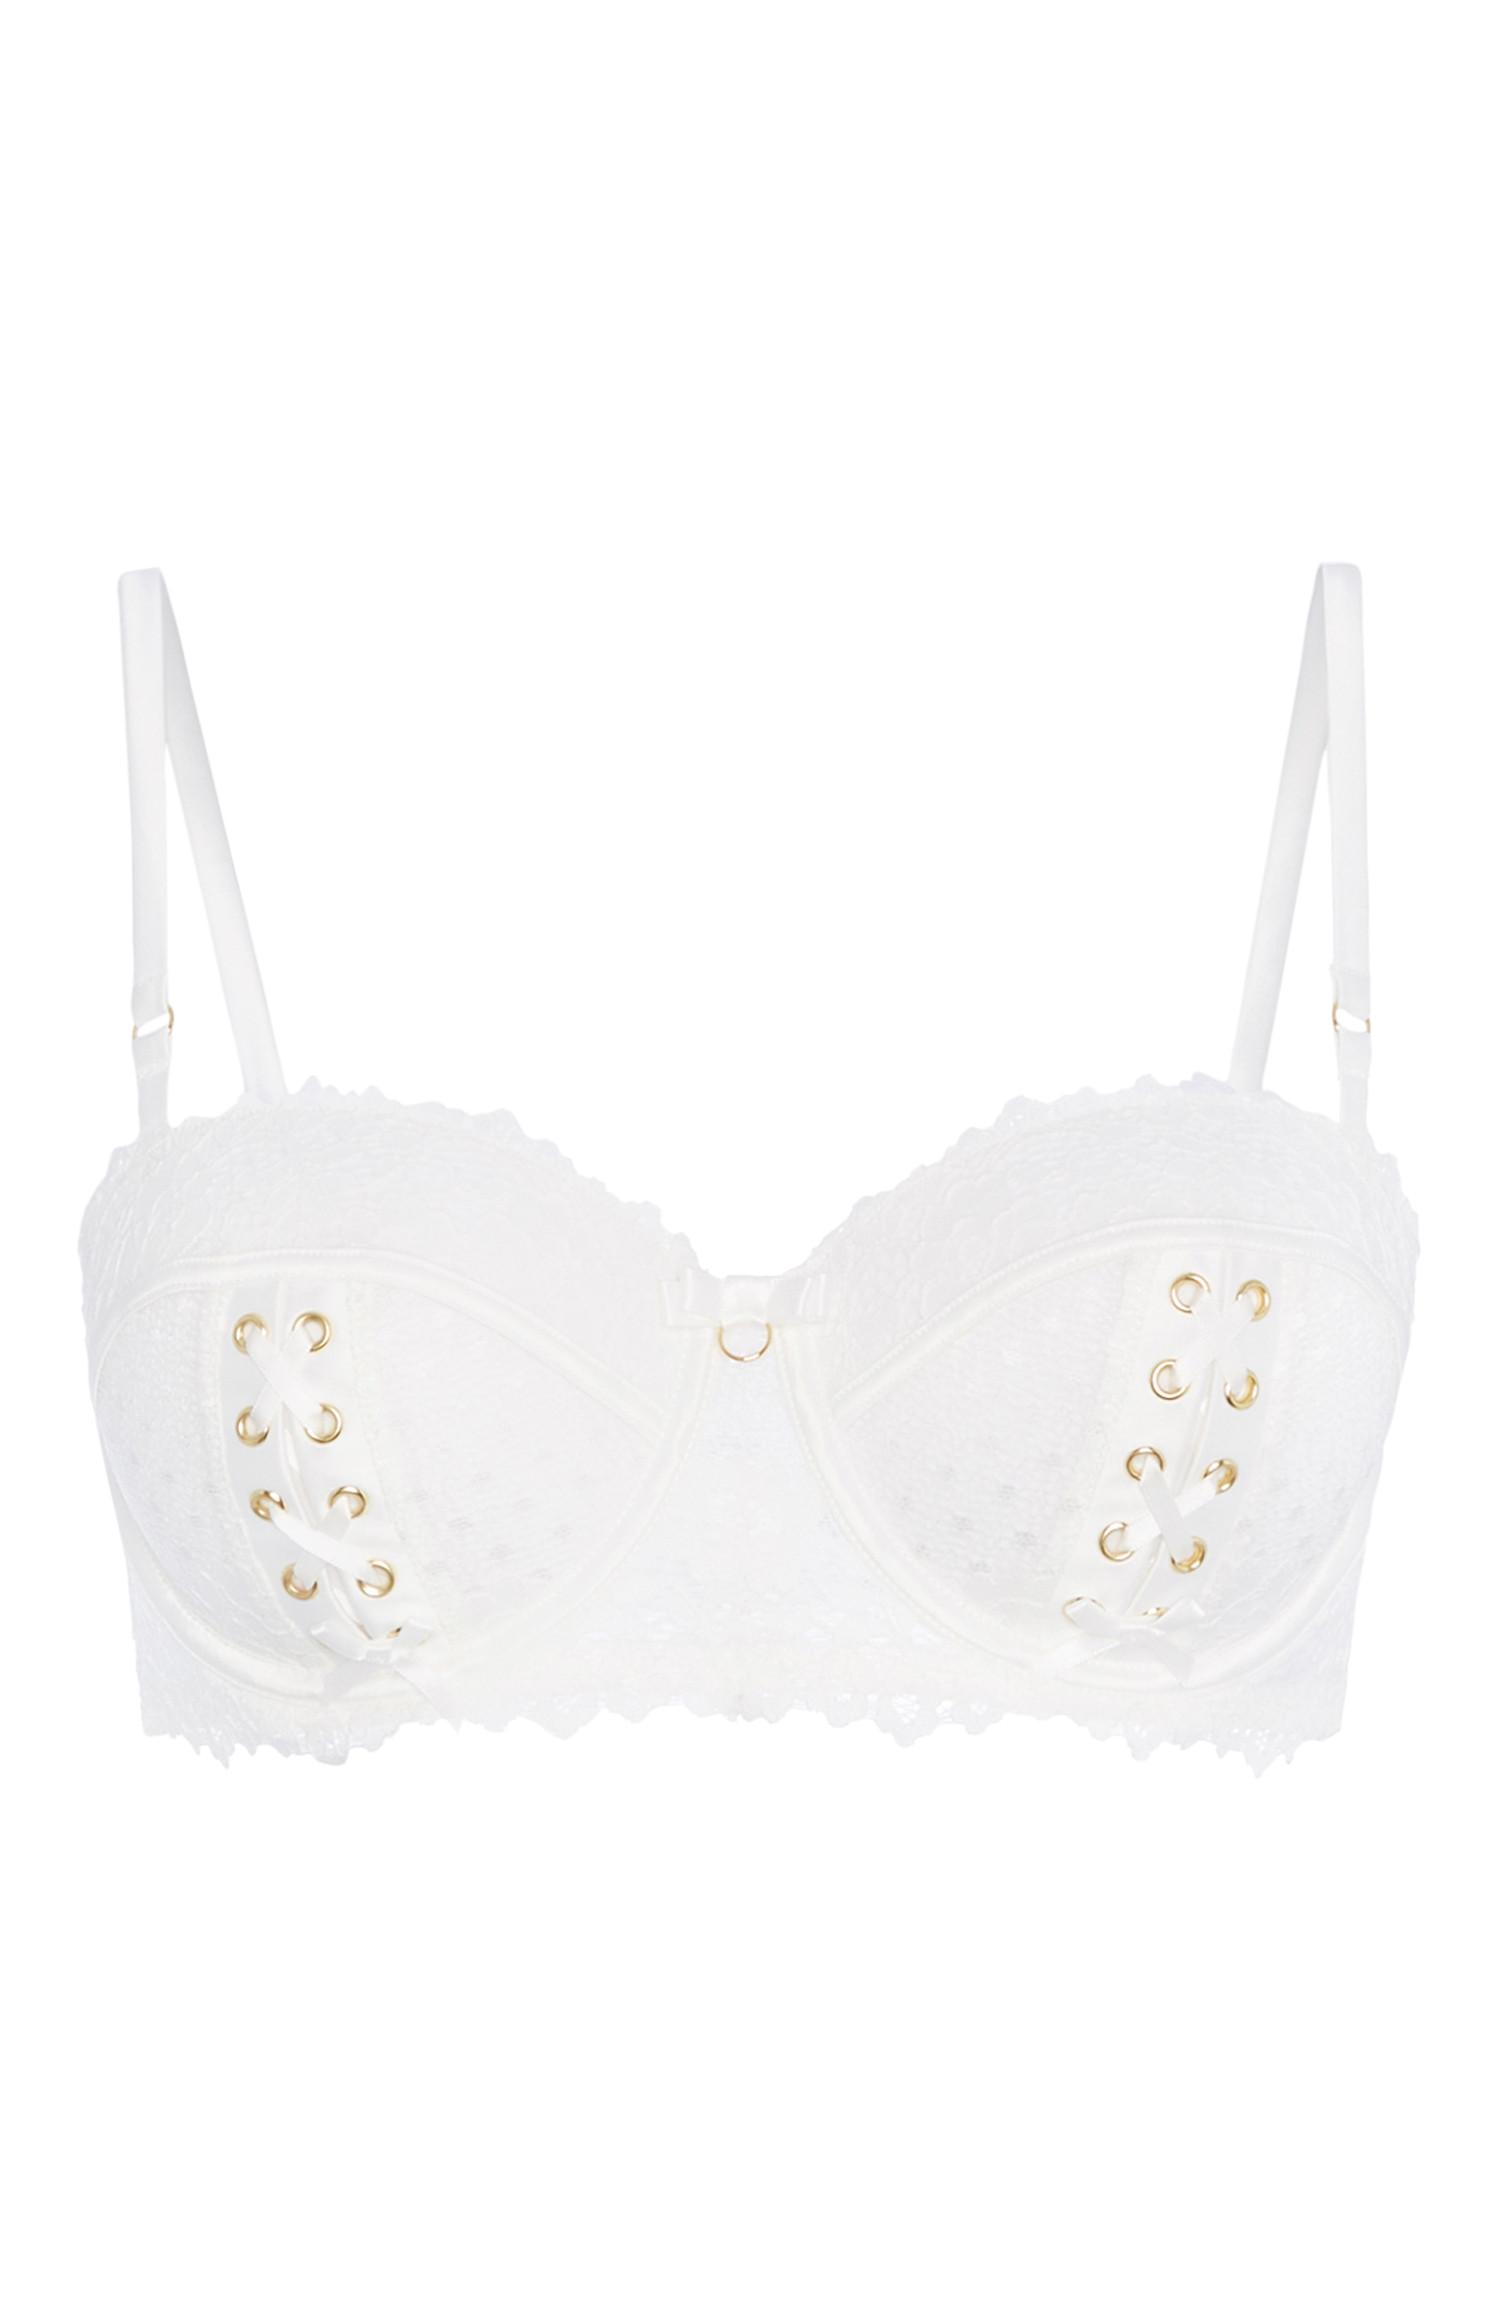 White Eyelet Lace A D Bra Coordinates Lingerie And Underwear Womens 0799